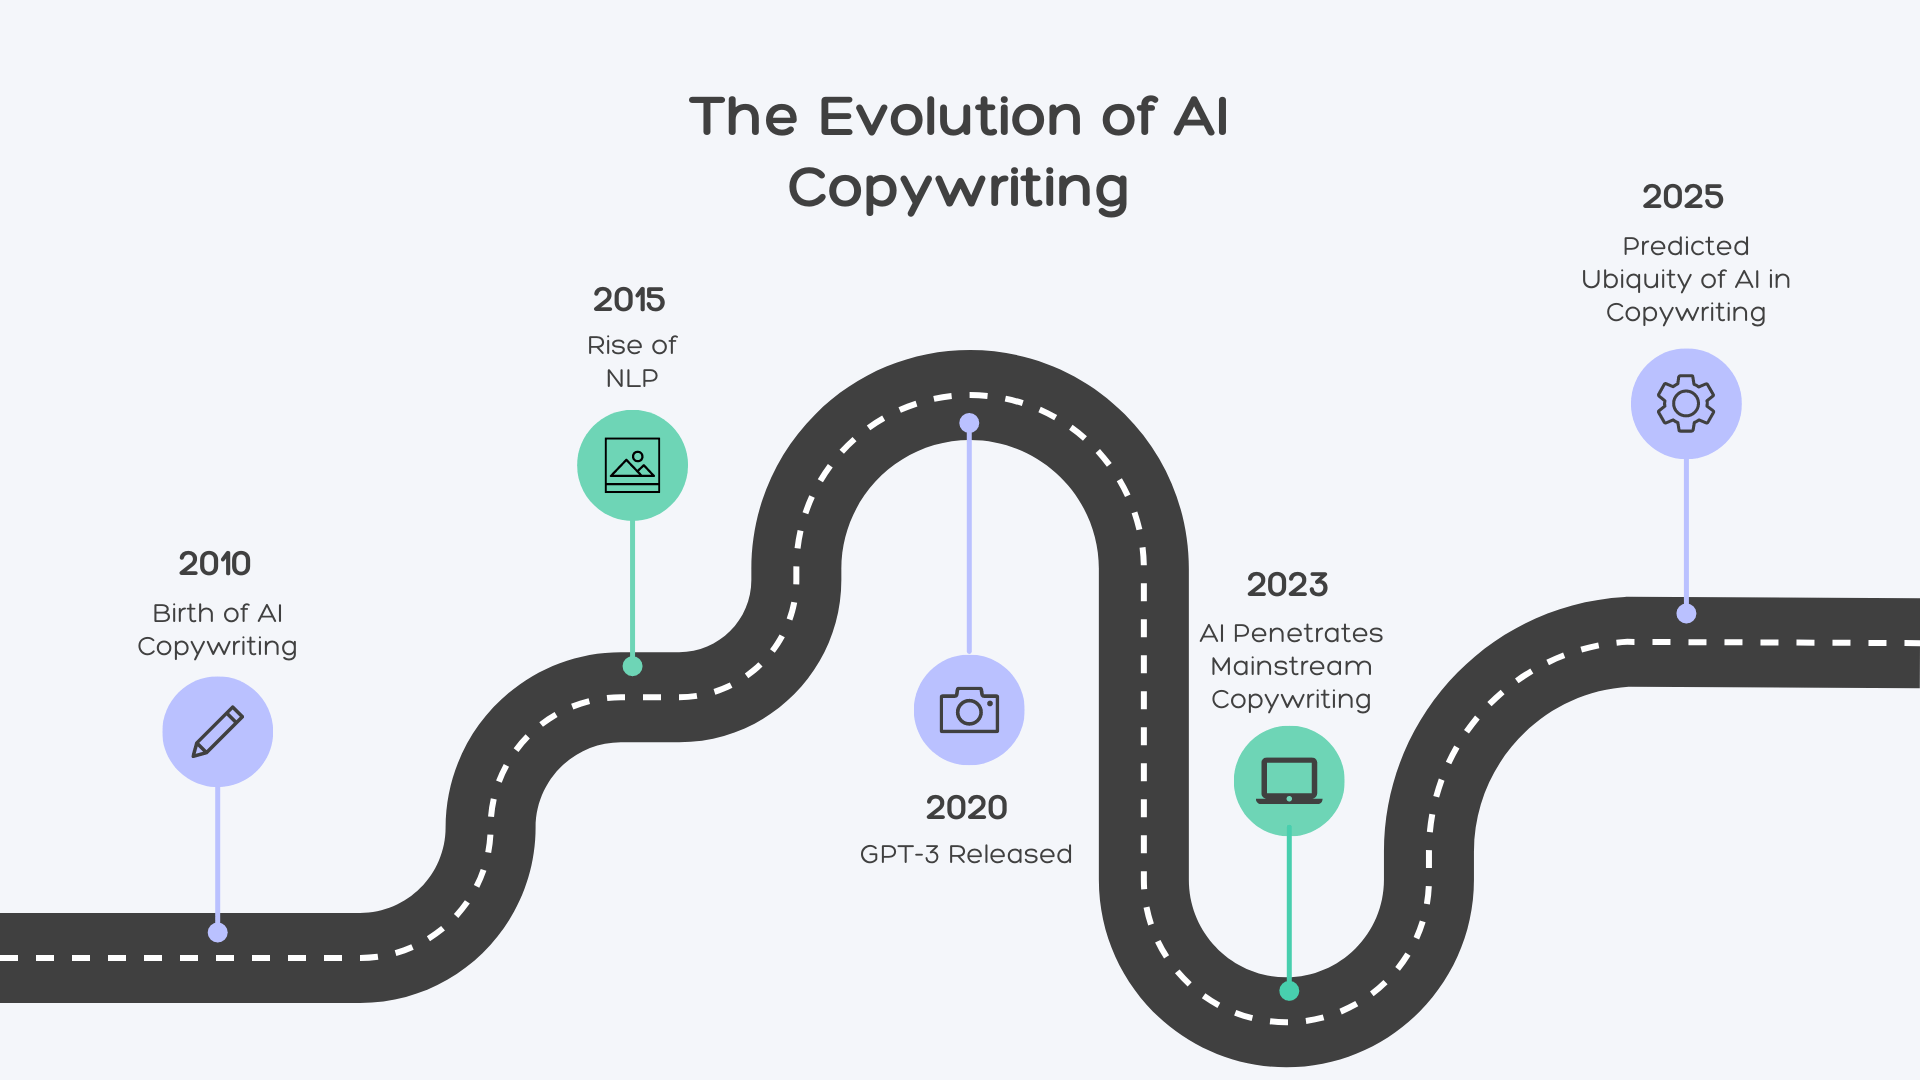 The evolution of AI copywriting from 2010 to 2025